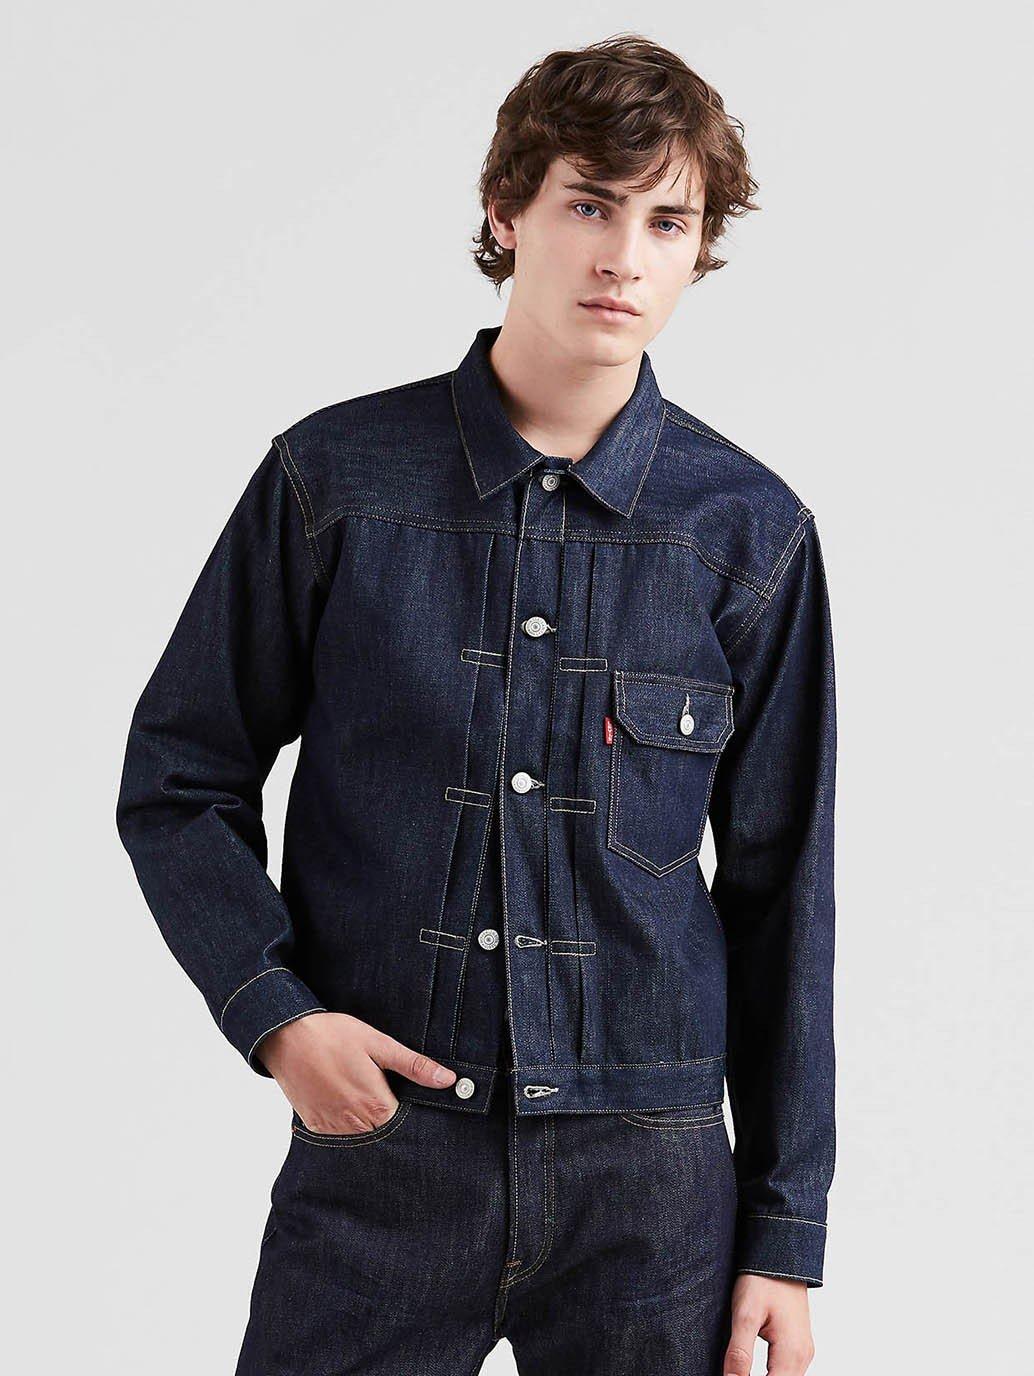 Buy 1936 Type I Jacket | Levi's® Official Online Store MY